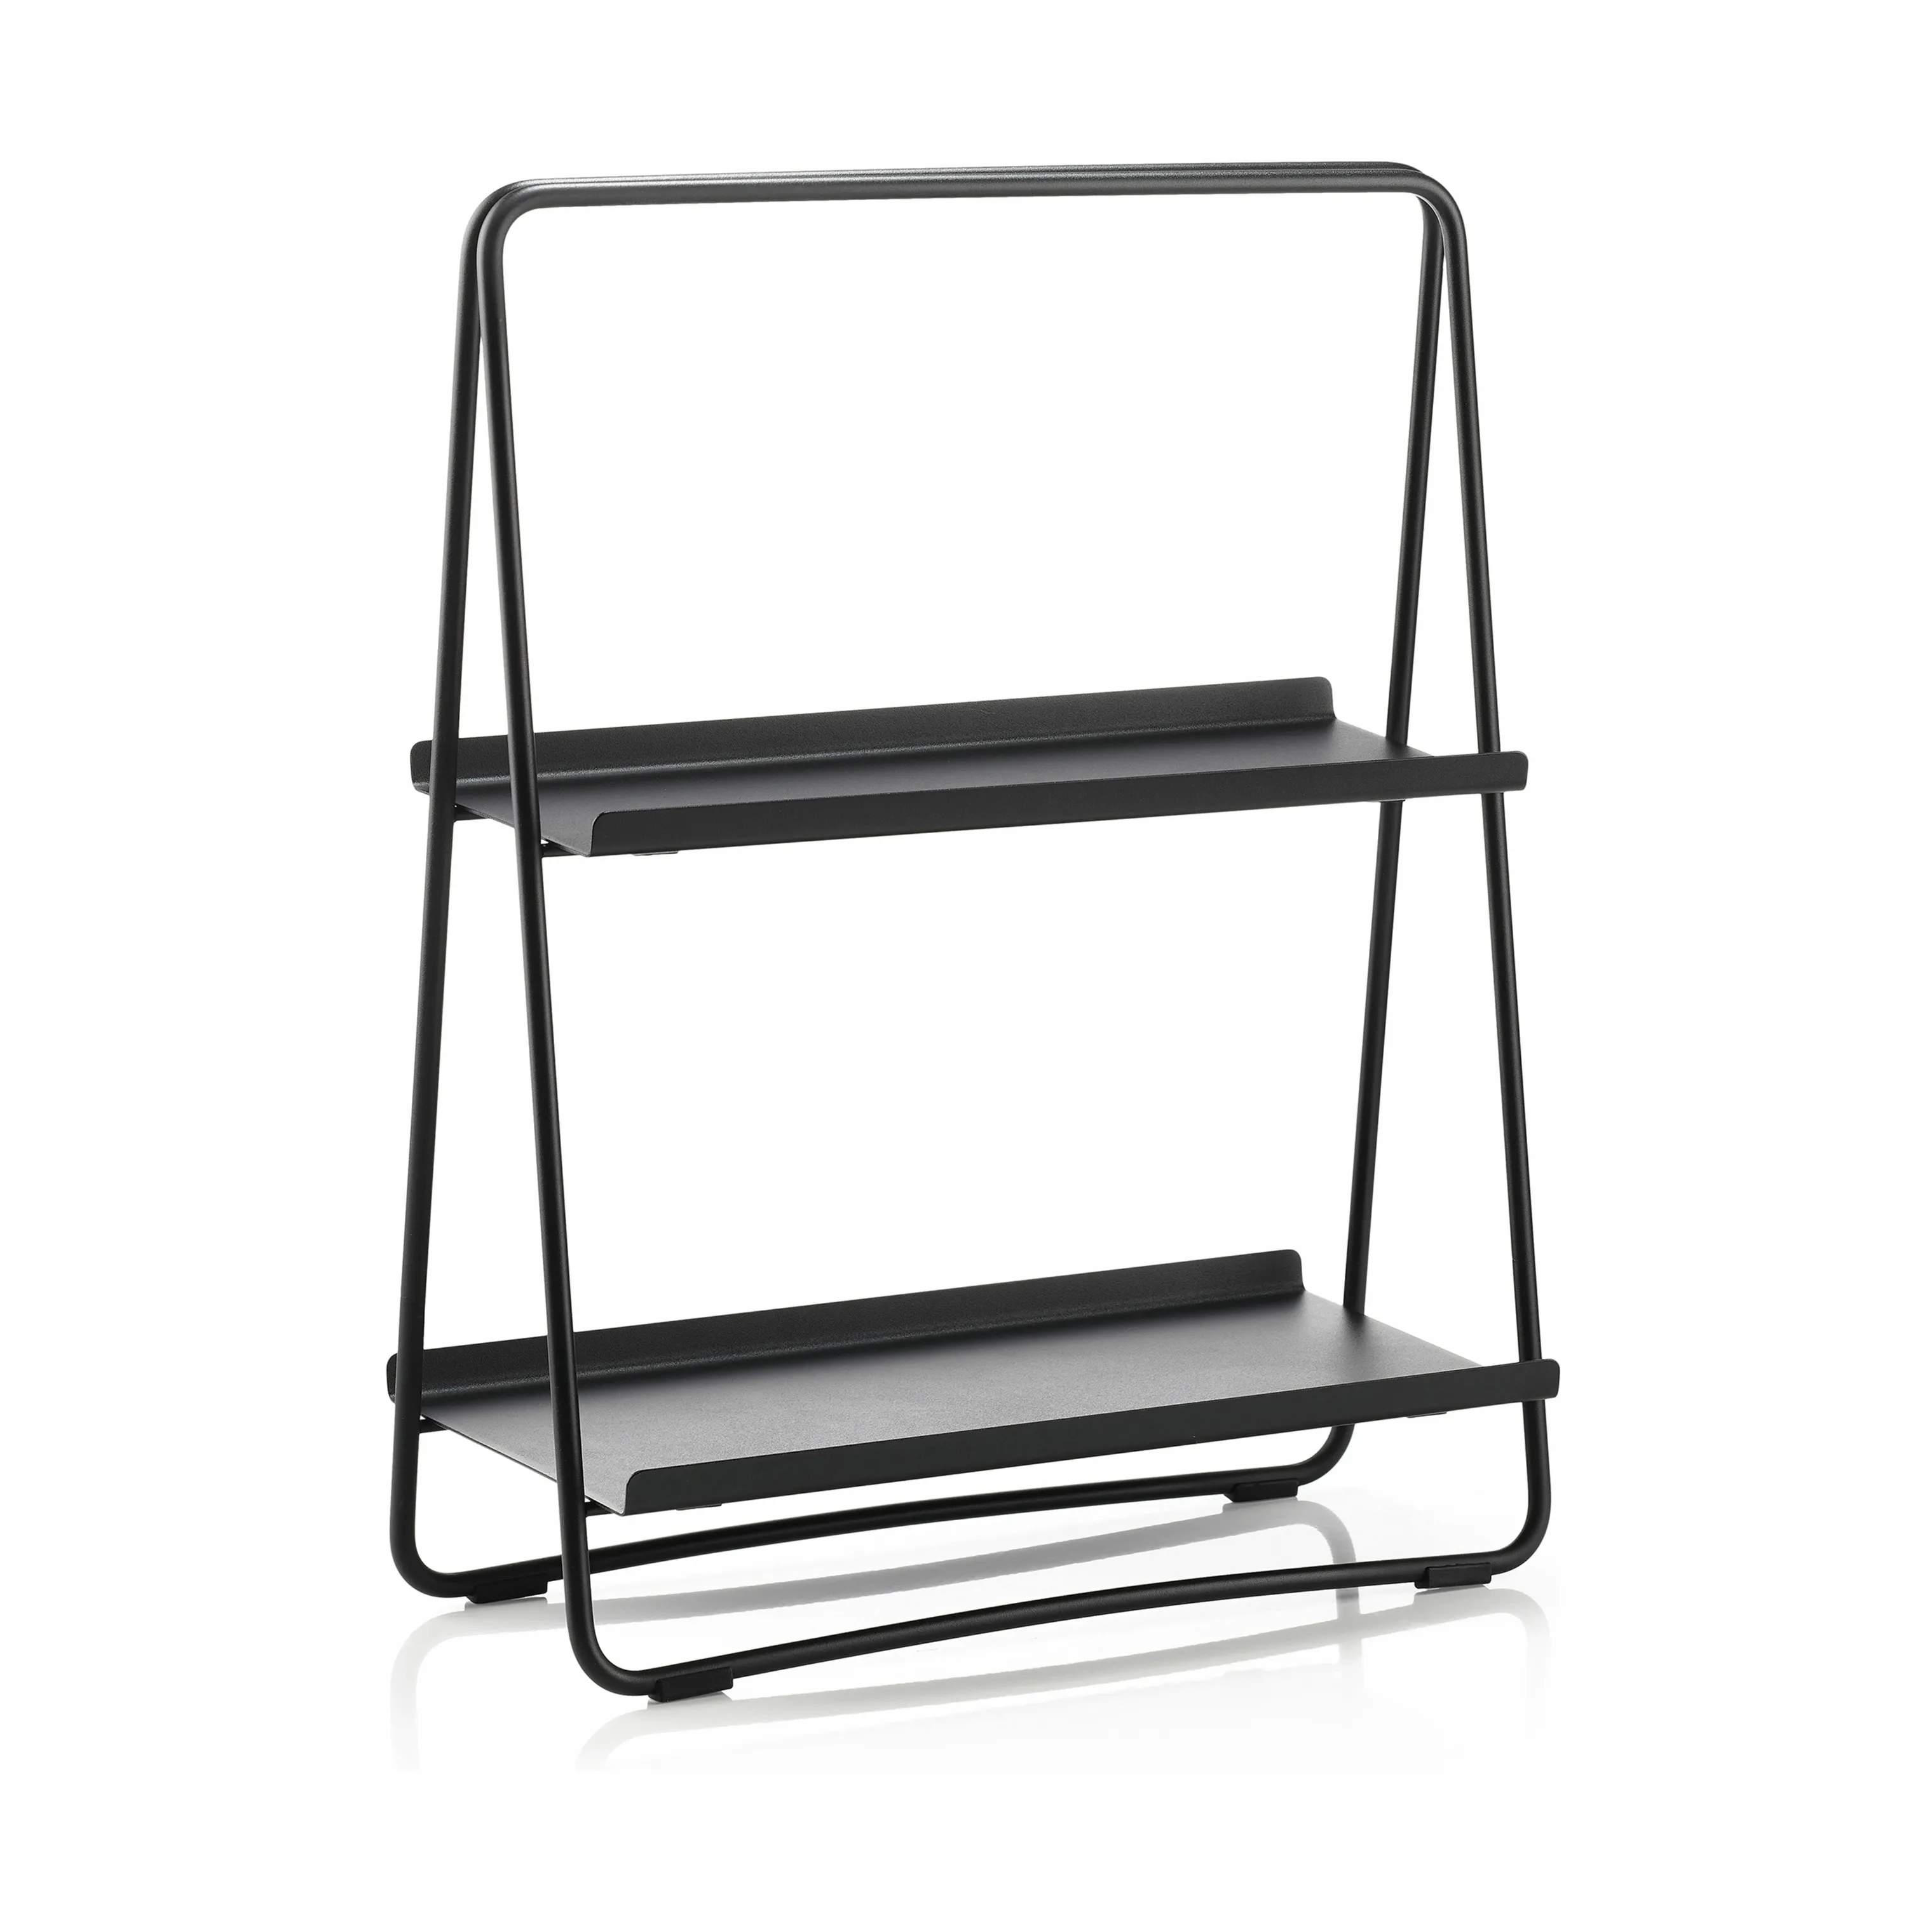 A-Table Reol, black, large